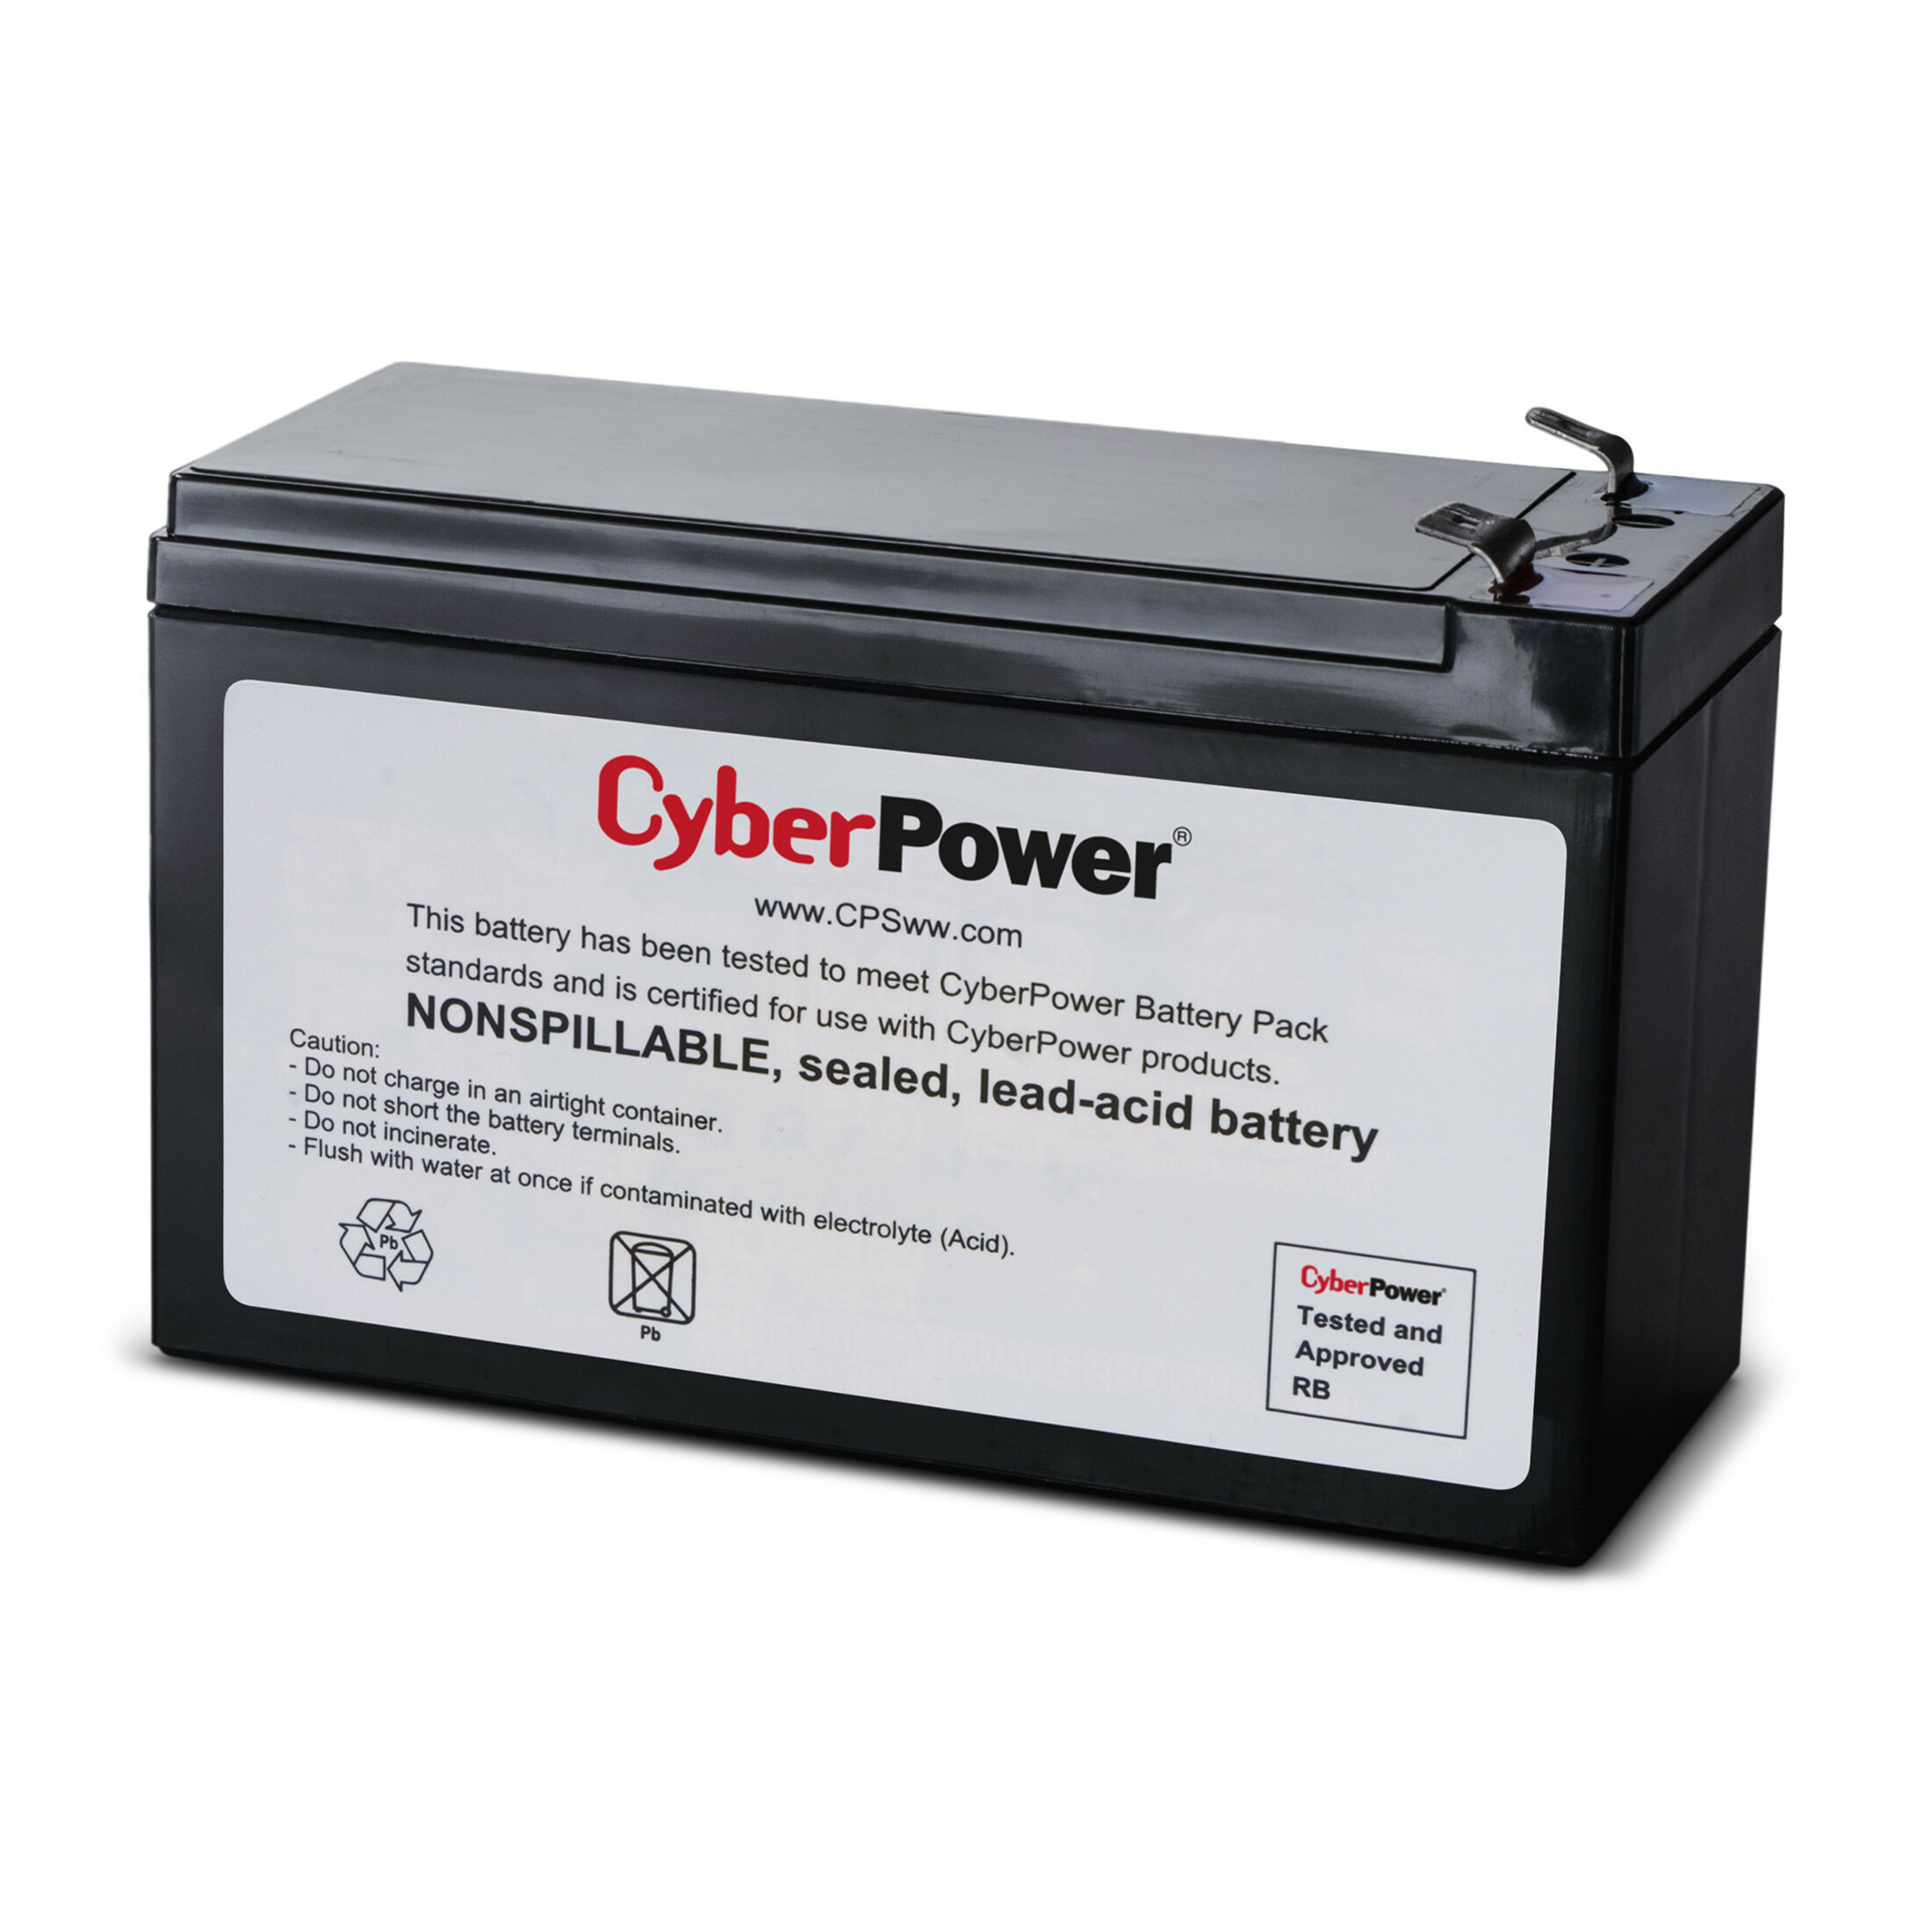 Cyber Power RB1270C Replacement Battery Cartridge1 X 12 V / 7 Ah Sealed Lead-Acid Battery, 18MO Warranty RB1270C